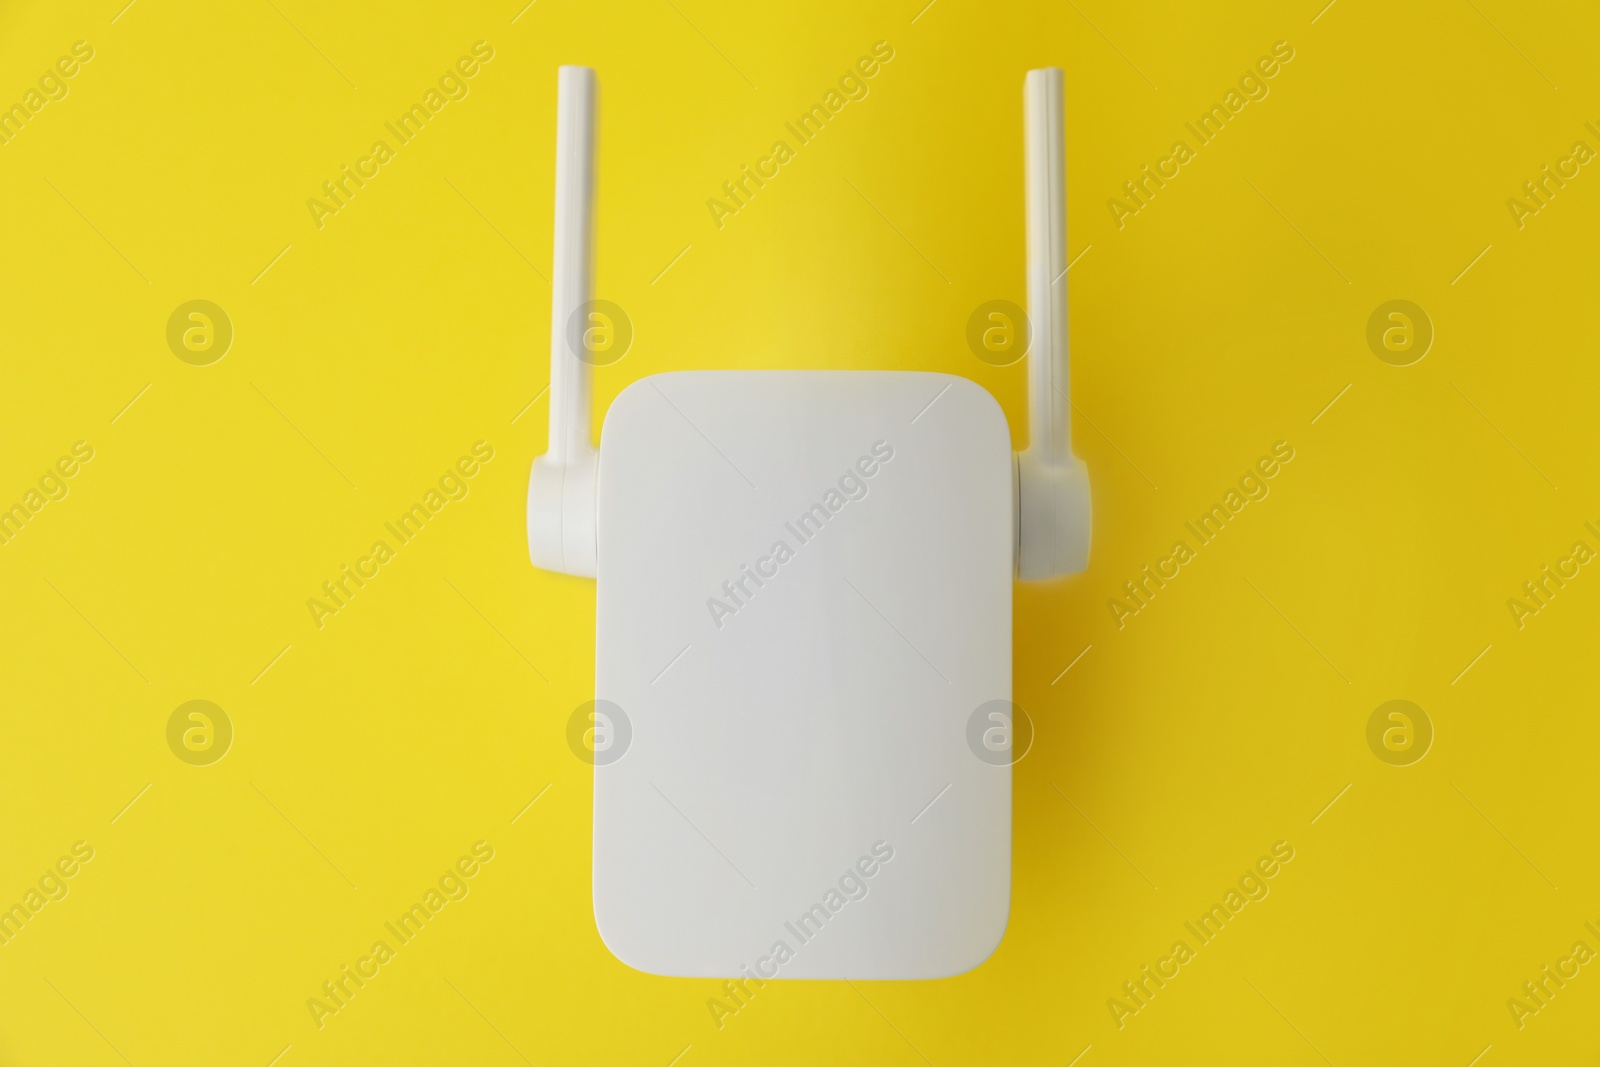 Photo of New modern Wi-Fi repeater on yellow background, top view